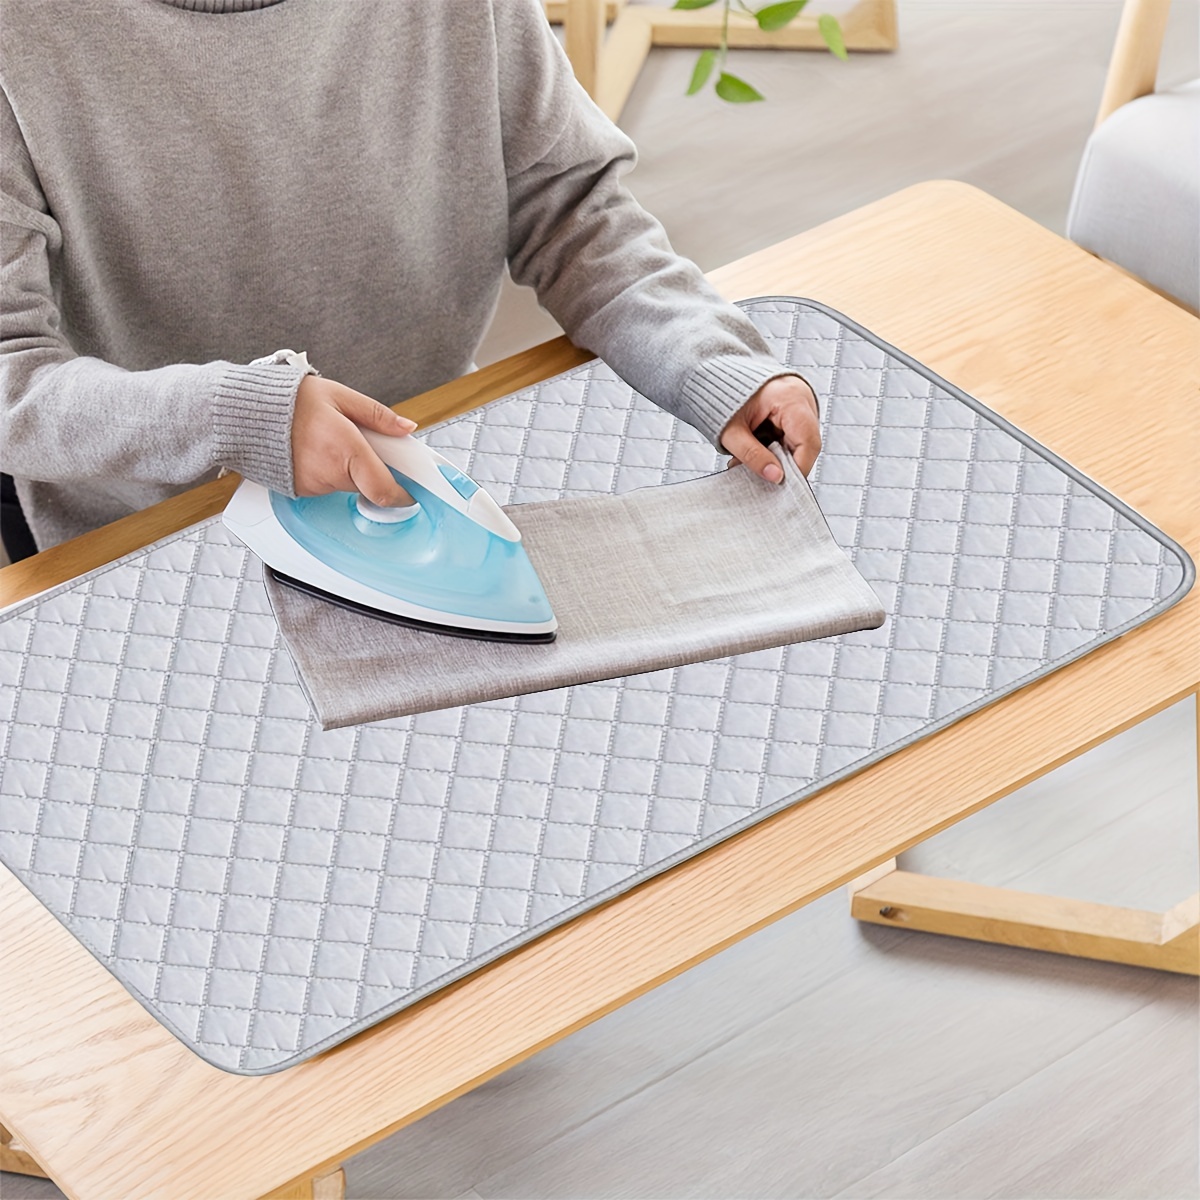 Ironing Blanket Ironing Mat Small footprintPortable Travel Ironing Pad Cover  for Washer DryerTable Top Countertop